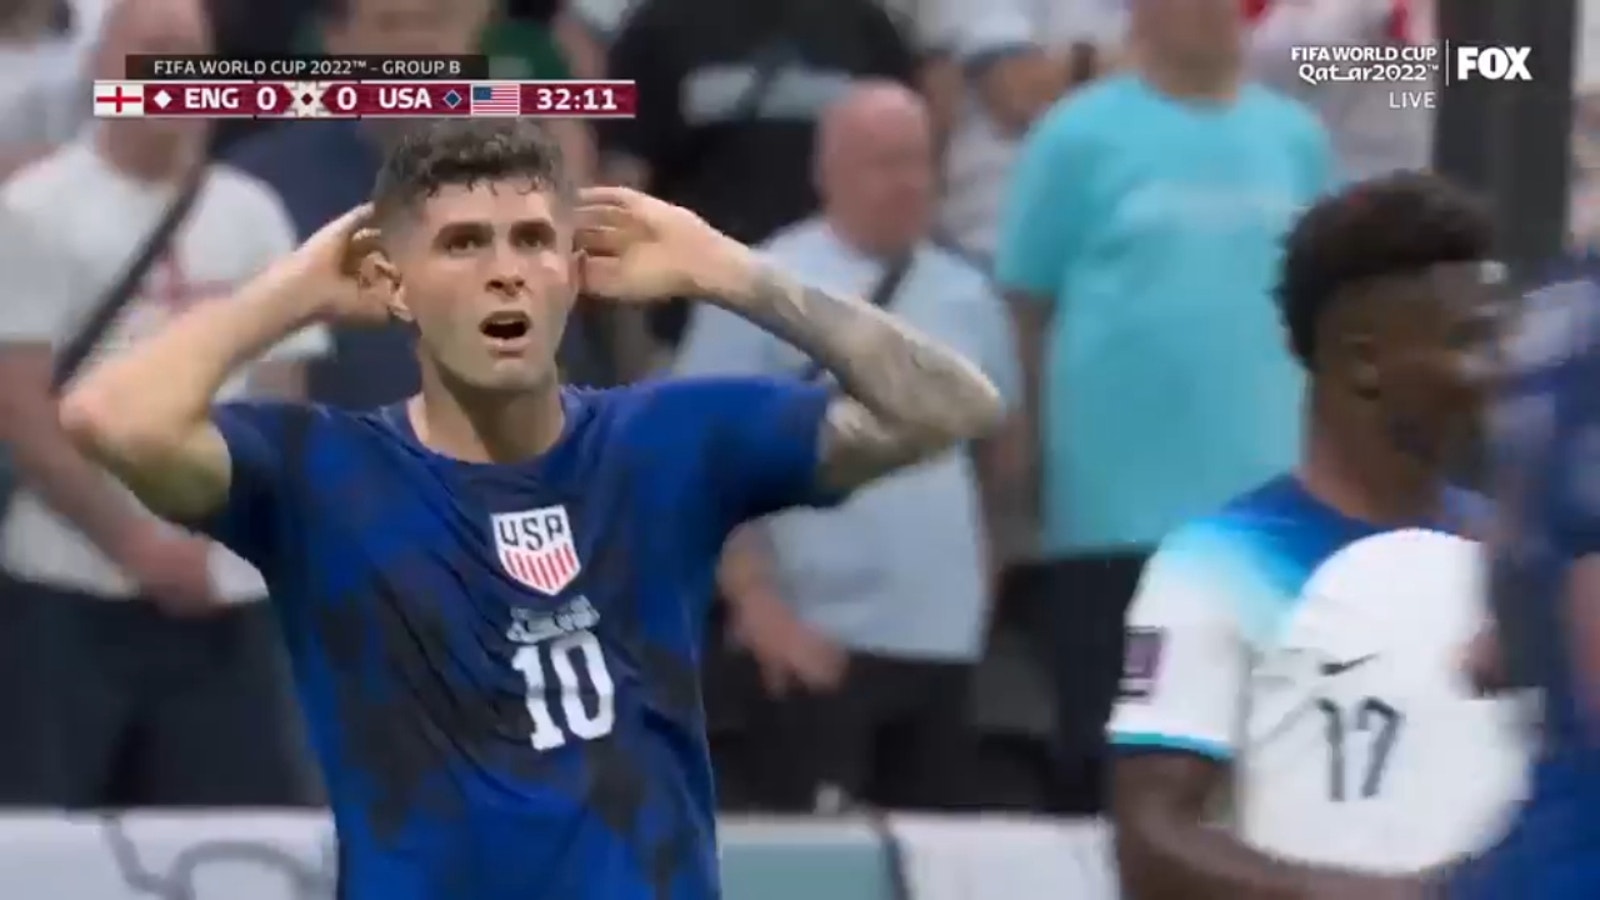 USA's Christian Pulisic's shot from the box hits the crossbar vs. England